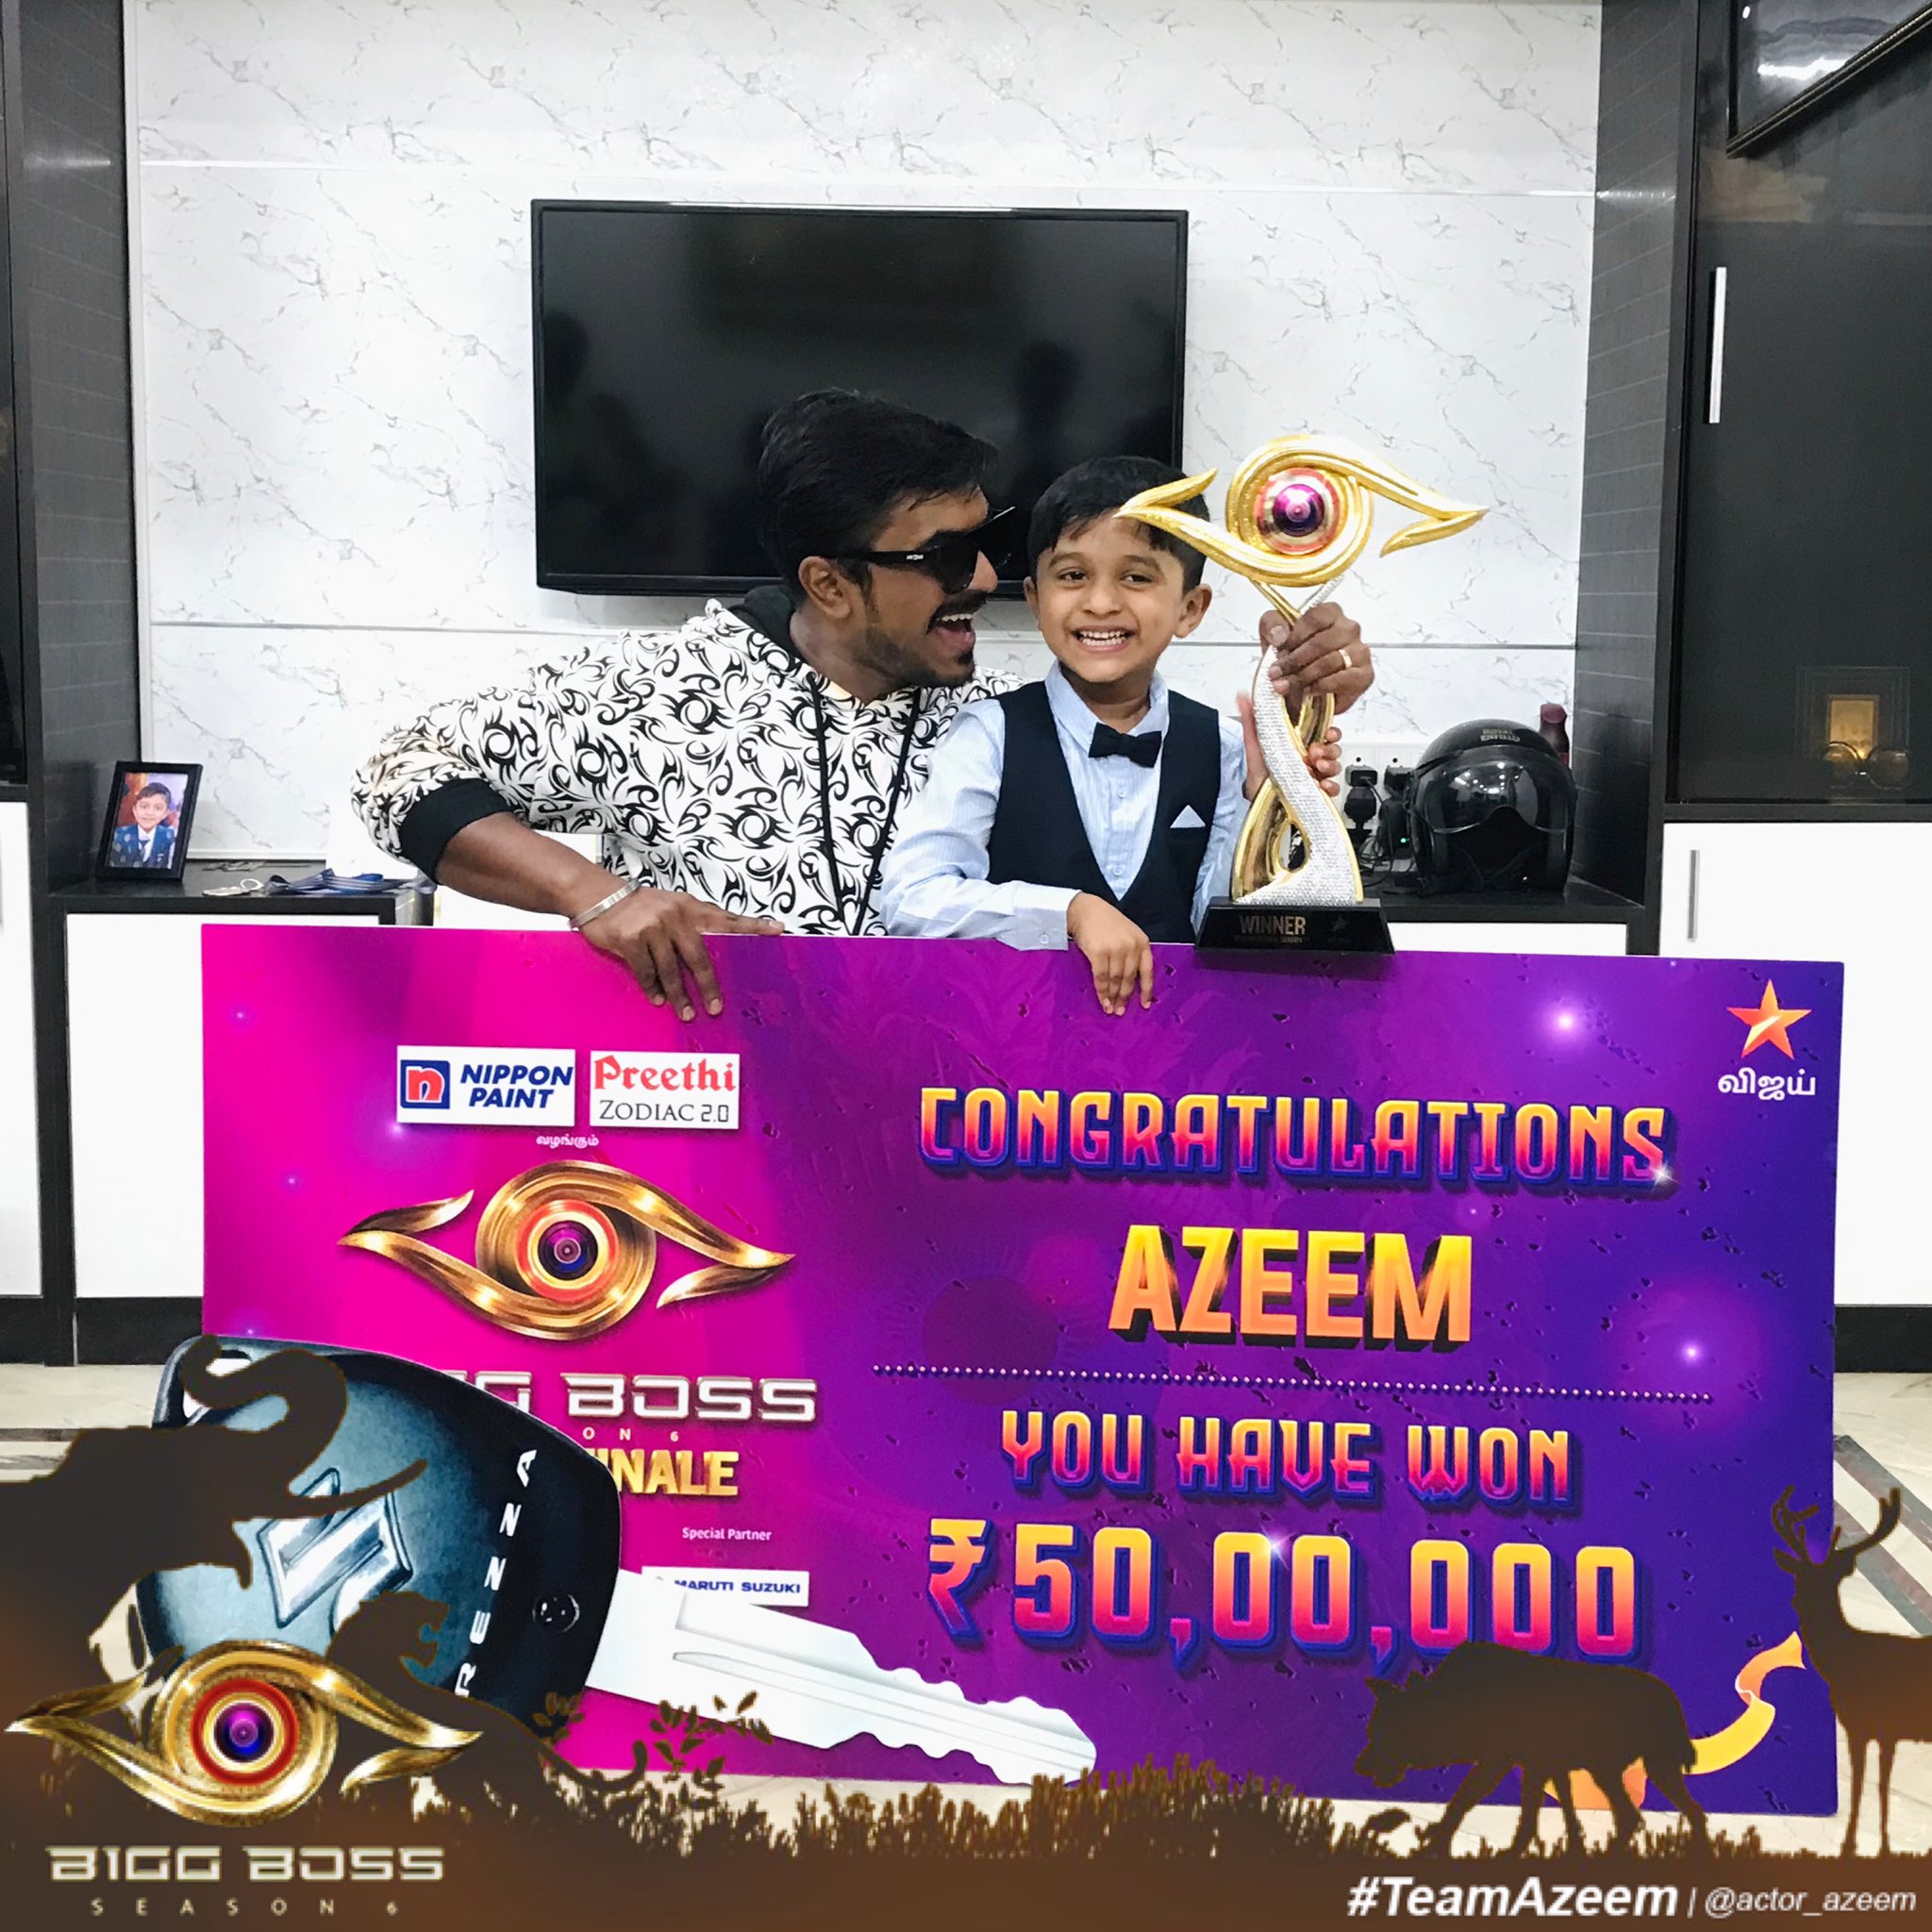 Azeem pic with his son after bigg boss title winner